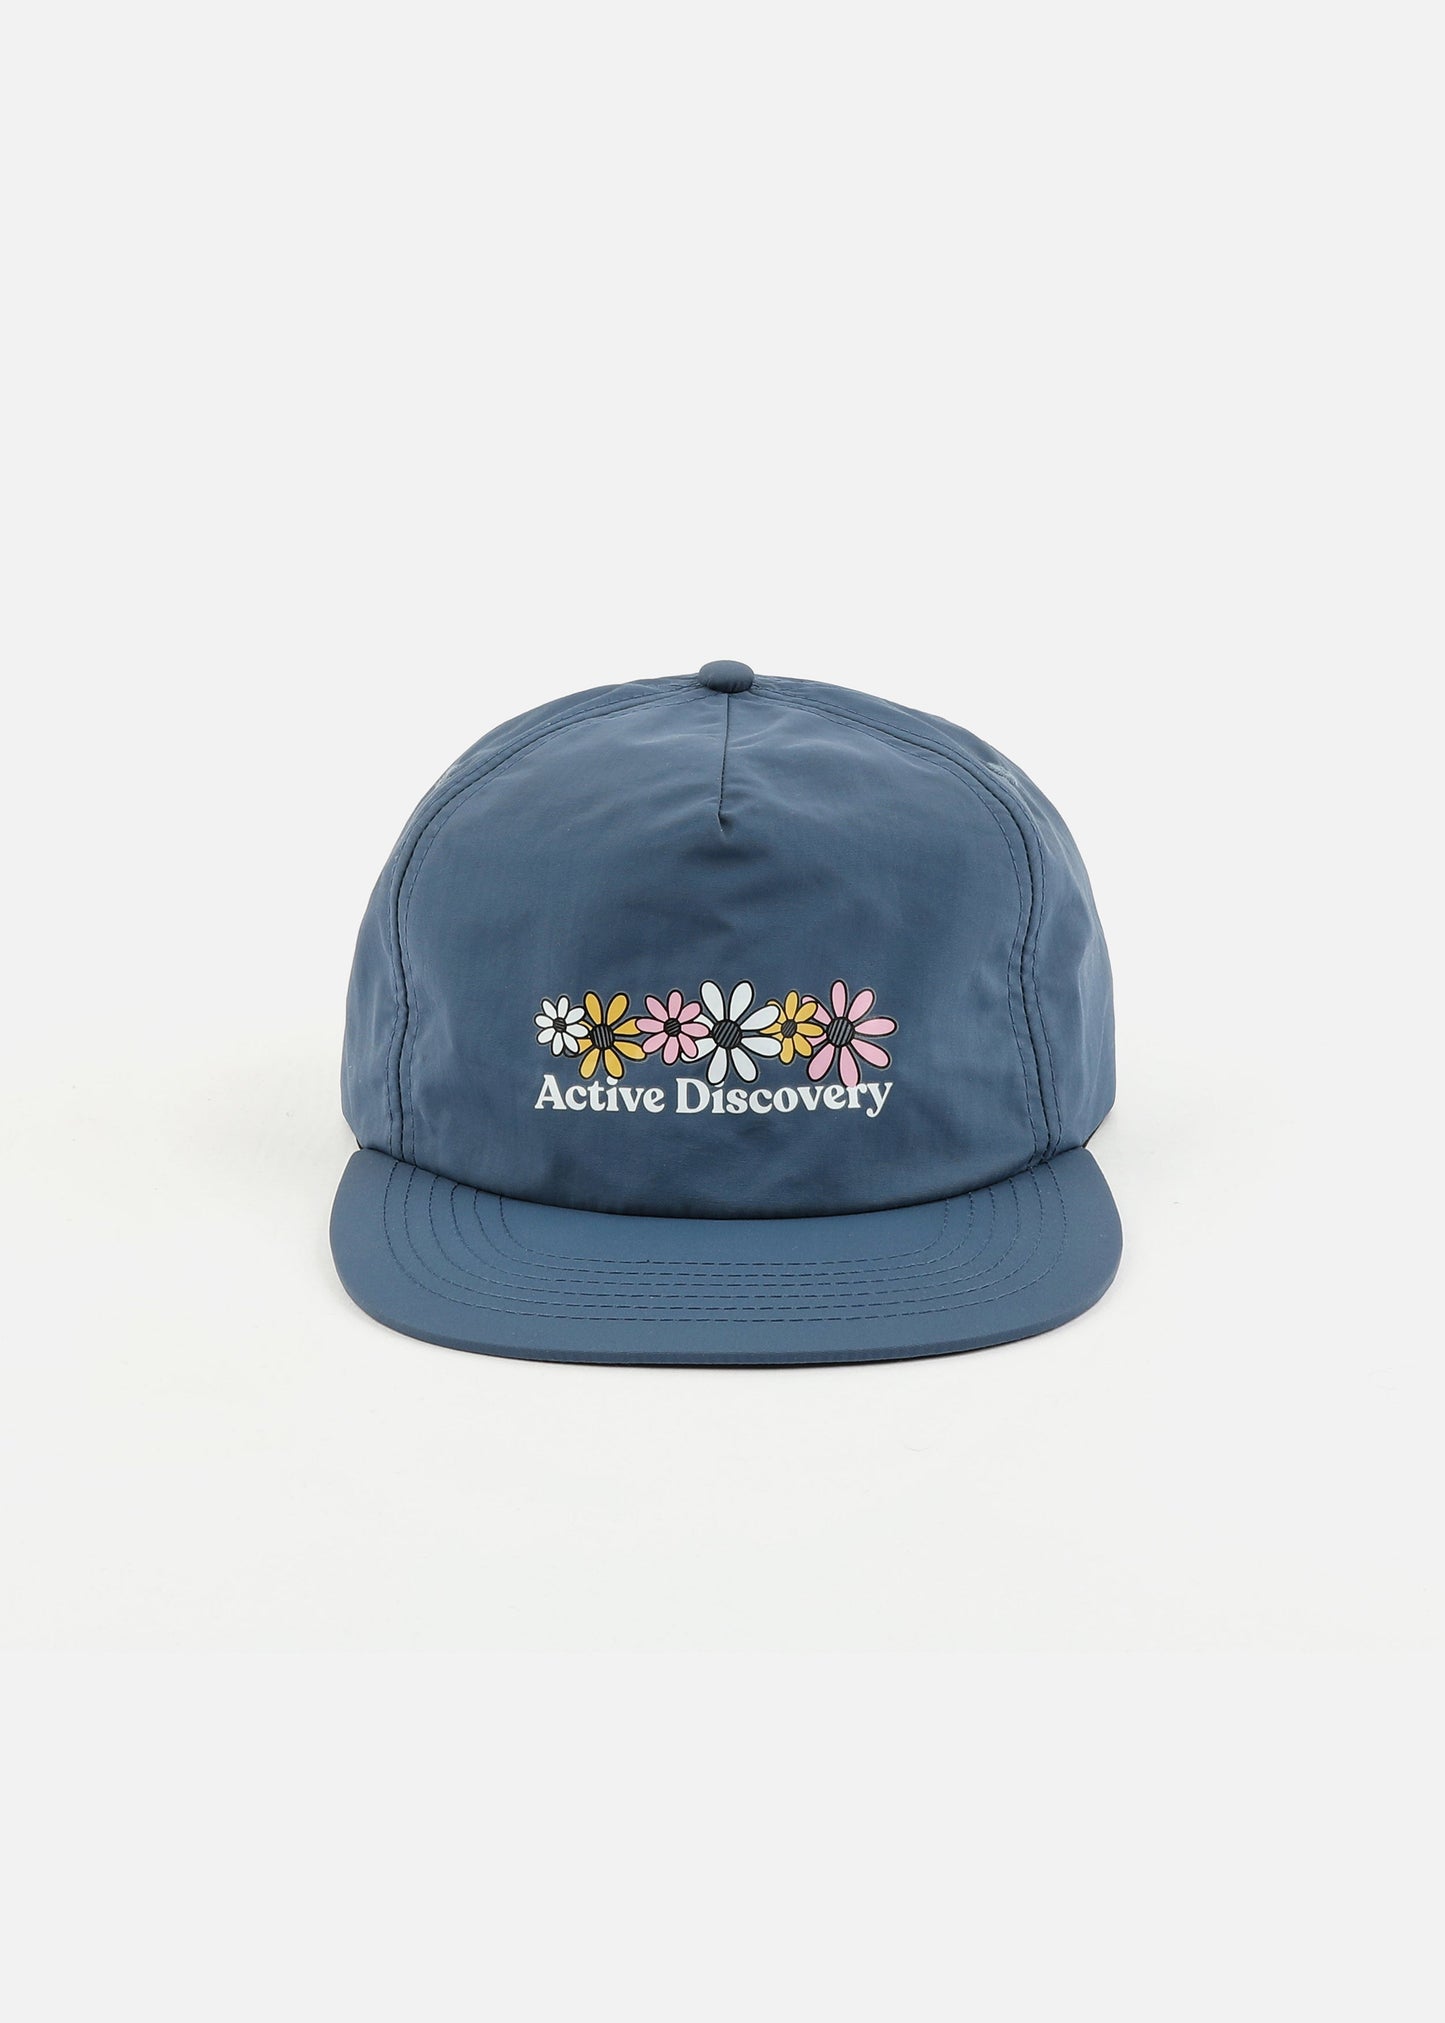 Active Discovery Cap : Slate Blue